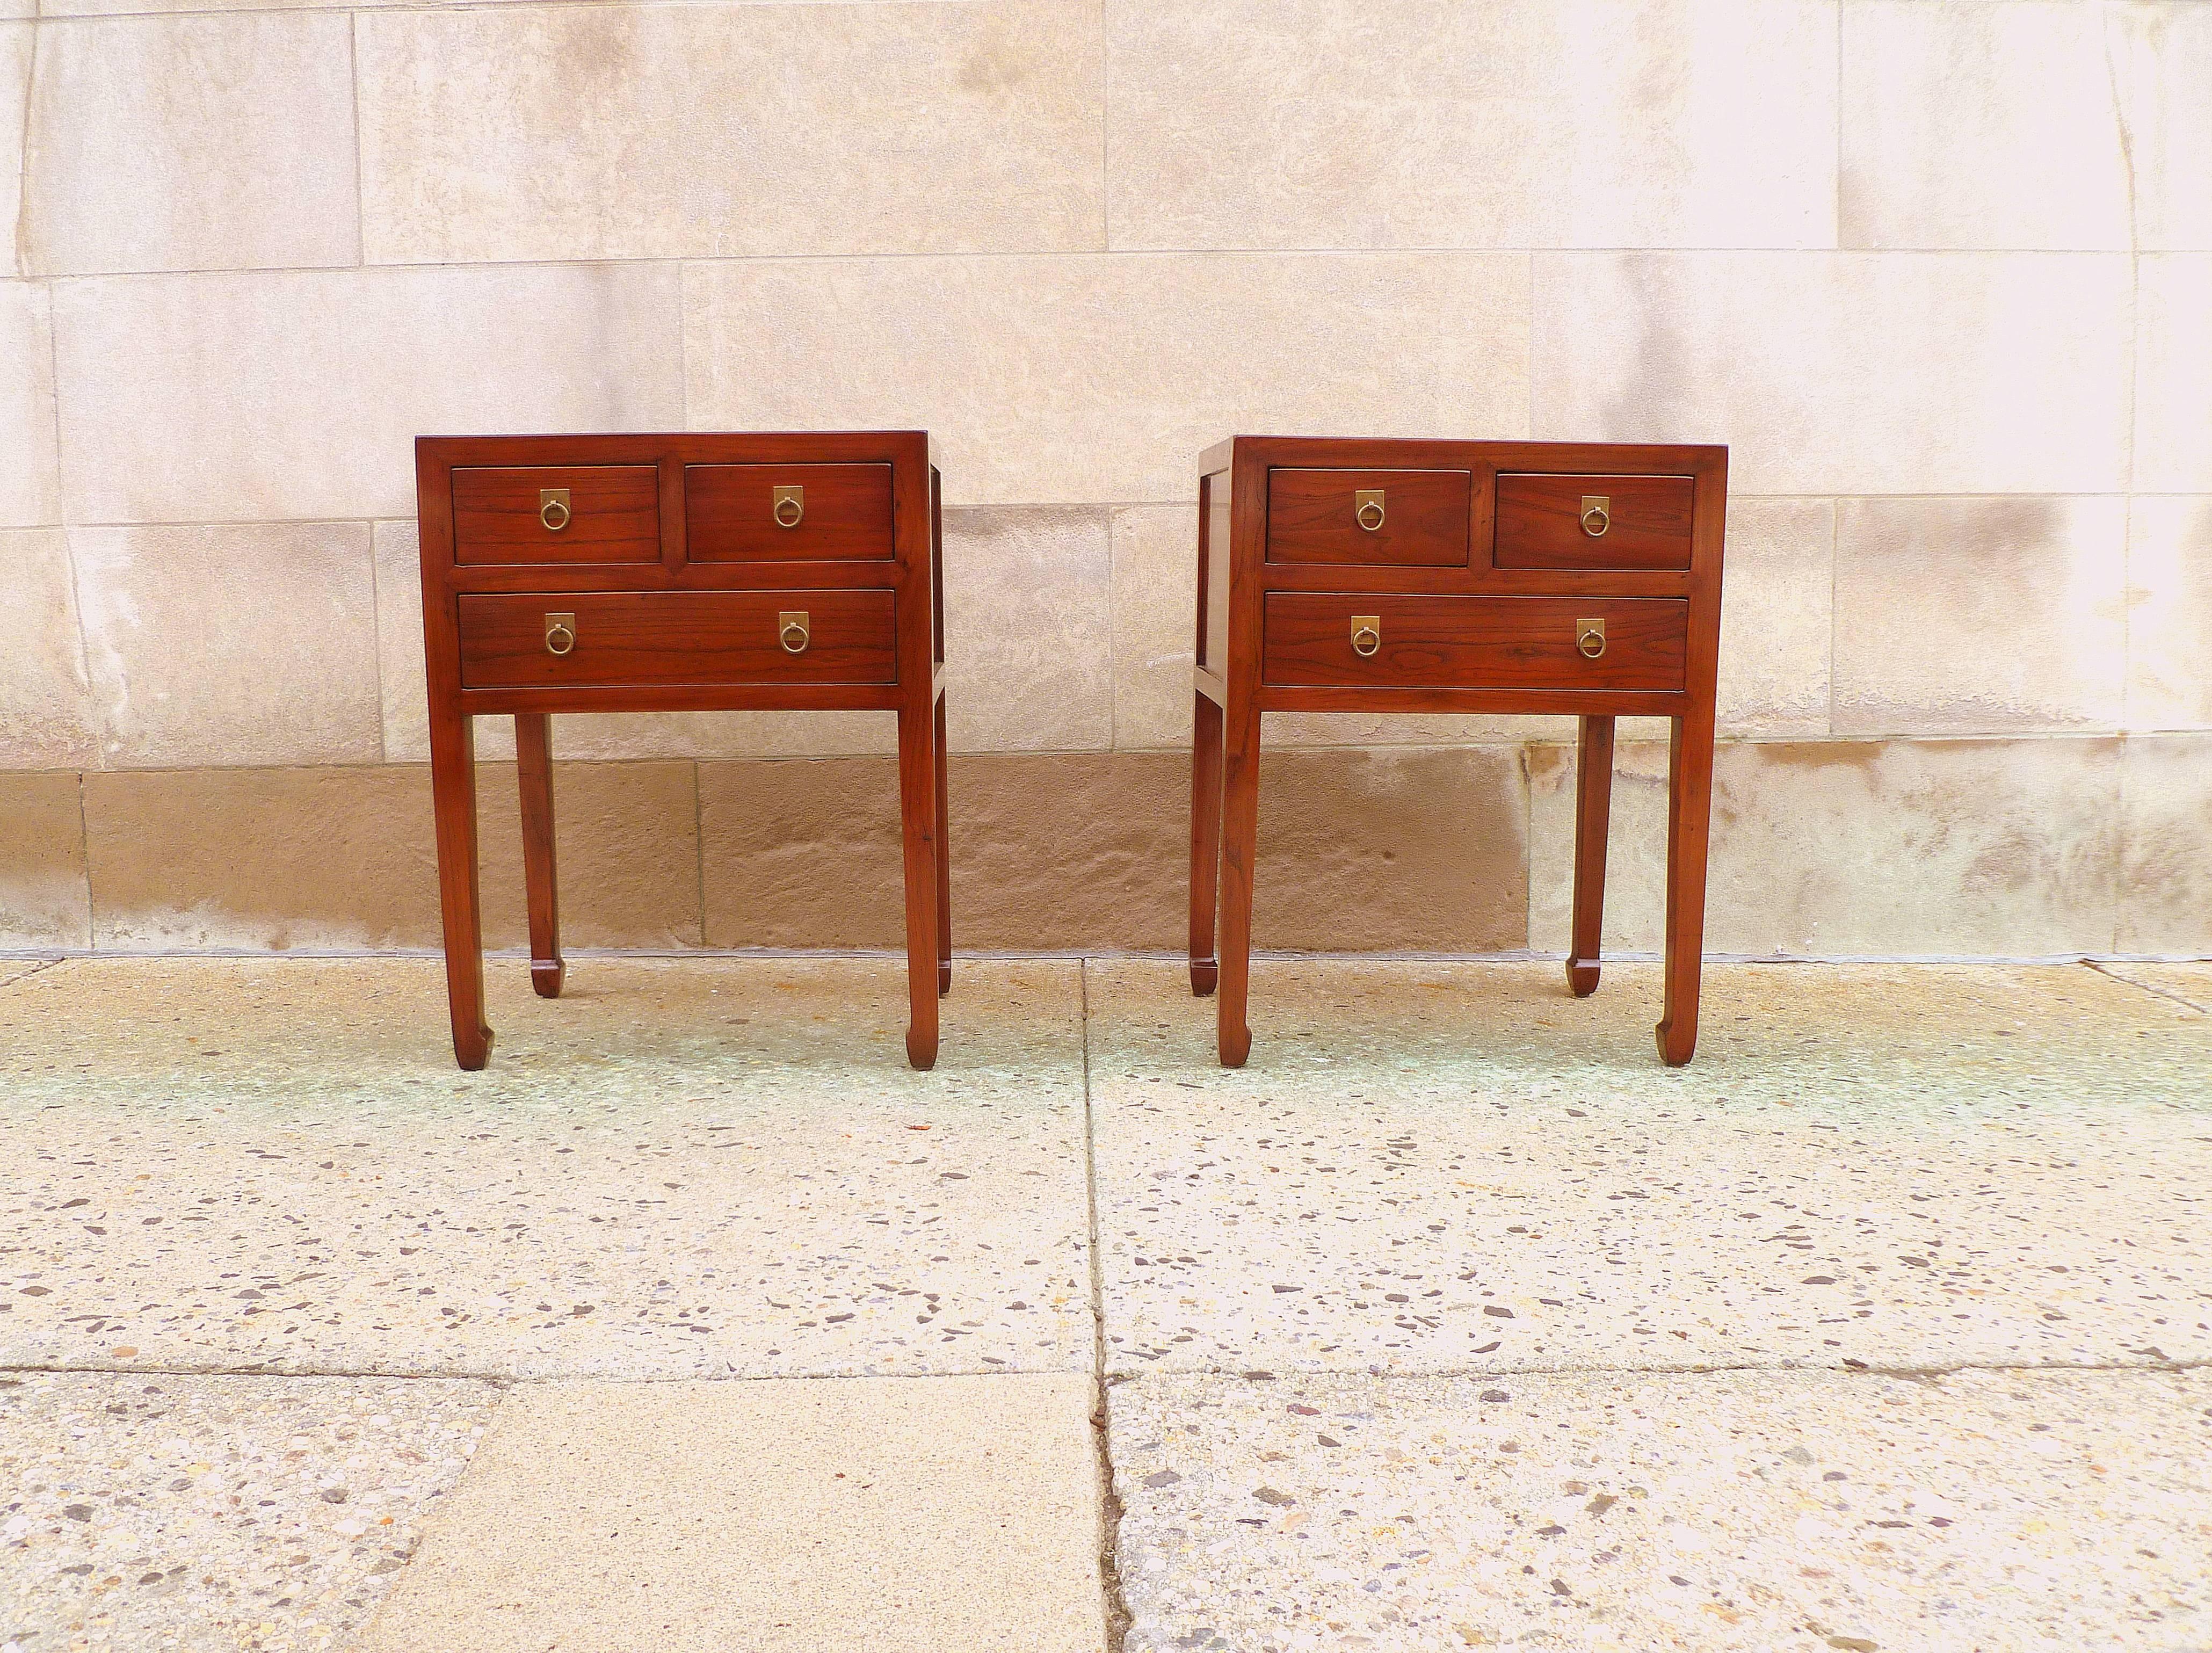 Fine jumu wood end tables with drawers, simple and elegant, fine quality pieces.  We carry fine quality furniture with elegant finished and has been appeared many times in 